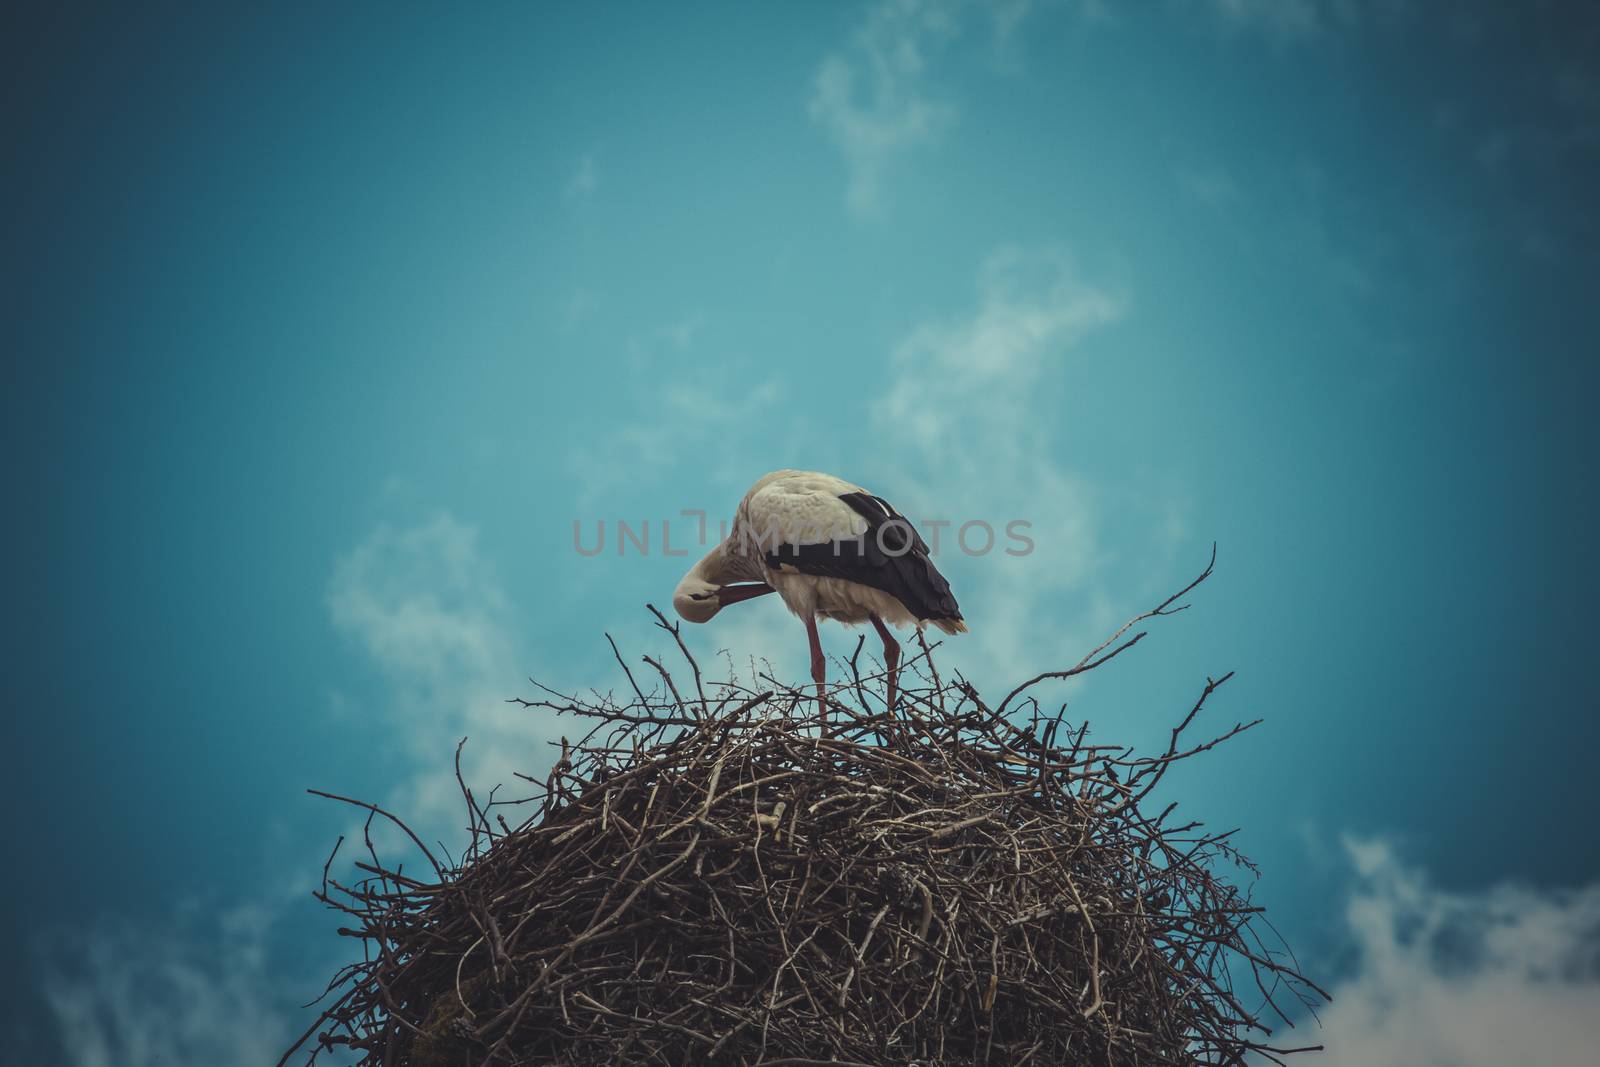 Wild, Stork nest made ������of tree branches over blue sky in dr by FernandoCortes